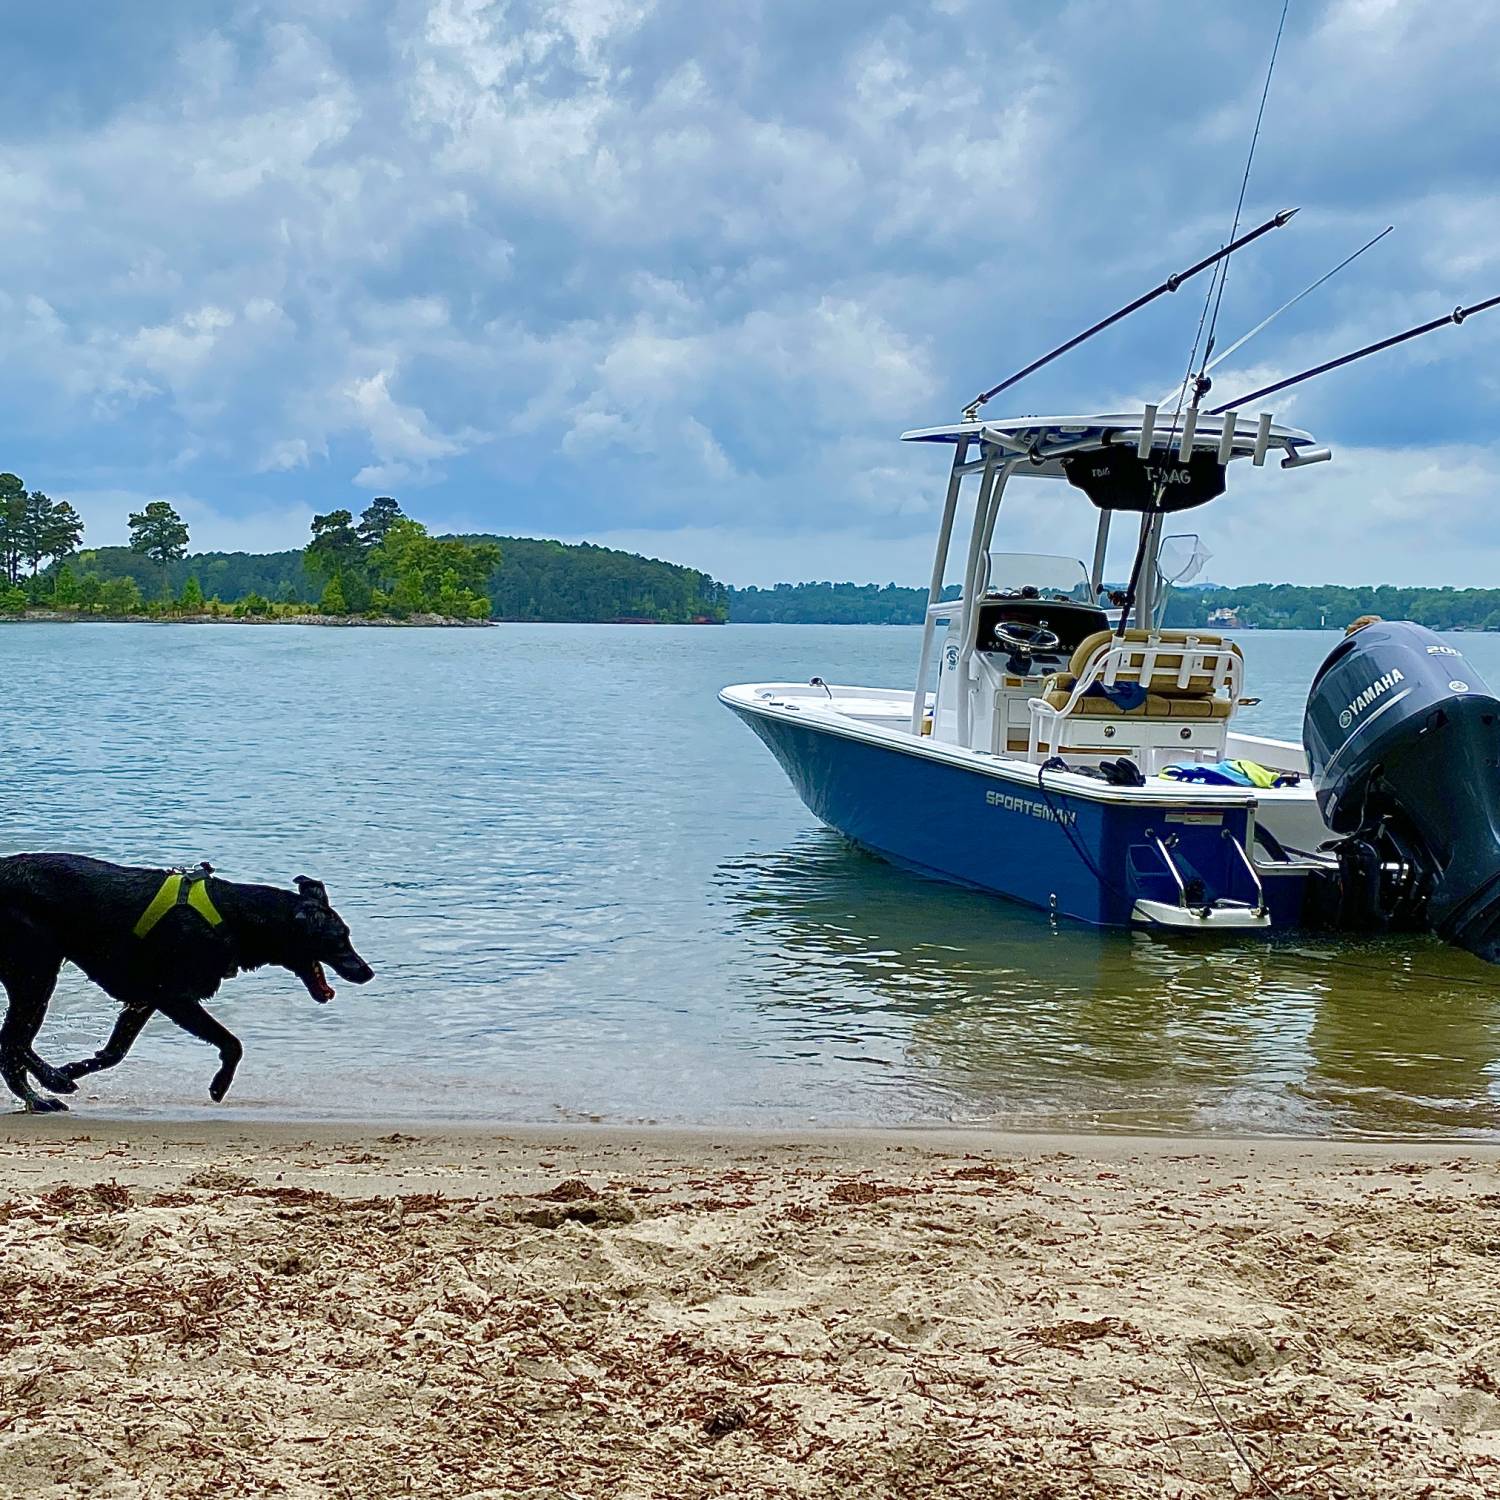 Bailey loves going on the Masters 227 and likes to explore new spots on the lake!